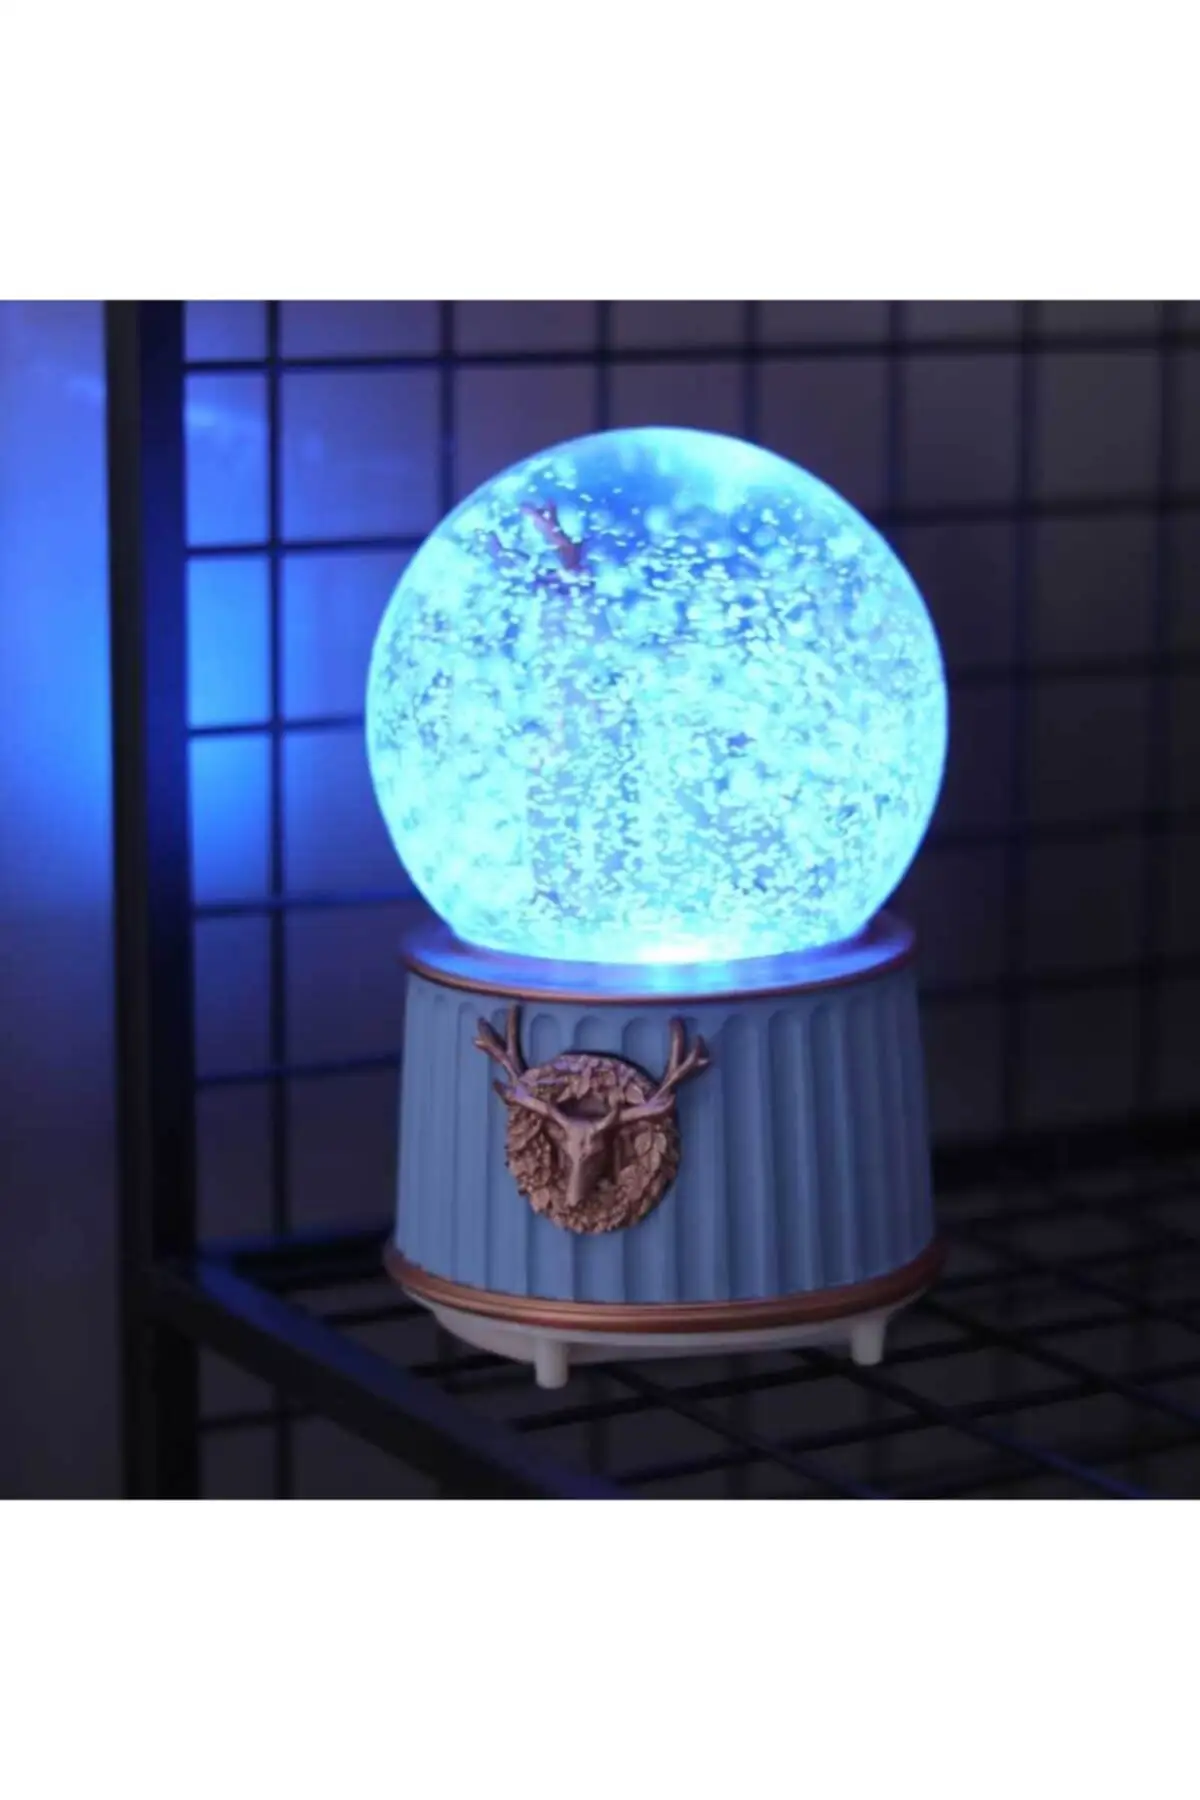 

Colorful Christmas Deer Snow Globe Blue Color With Light And Music Portable LED Desk Lamp Night Light Decoration Table Lamp